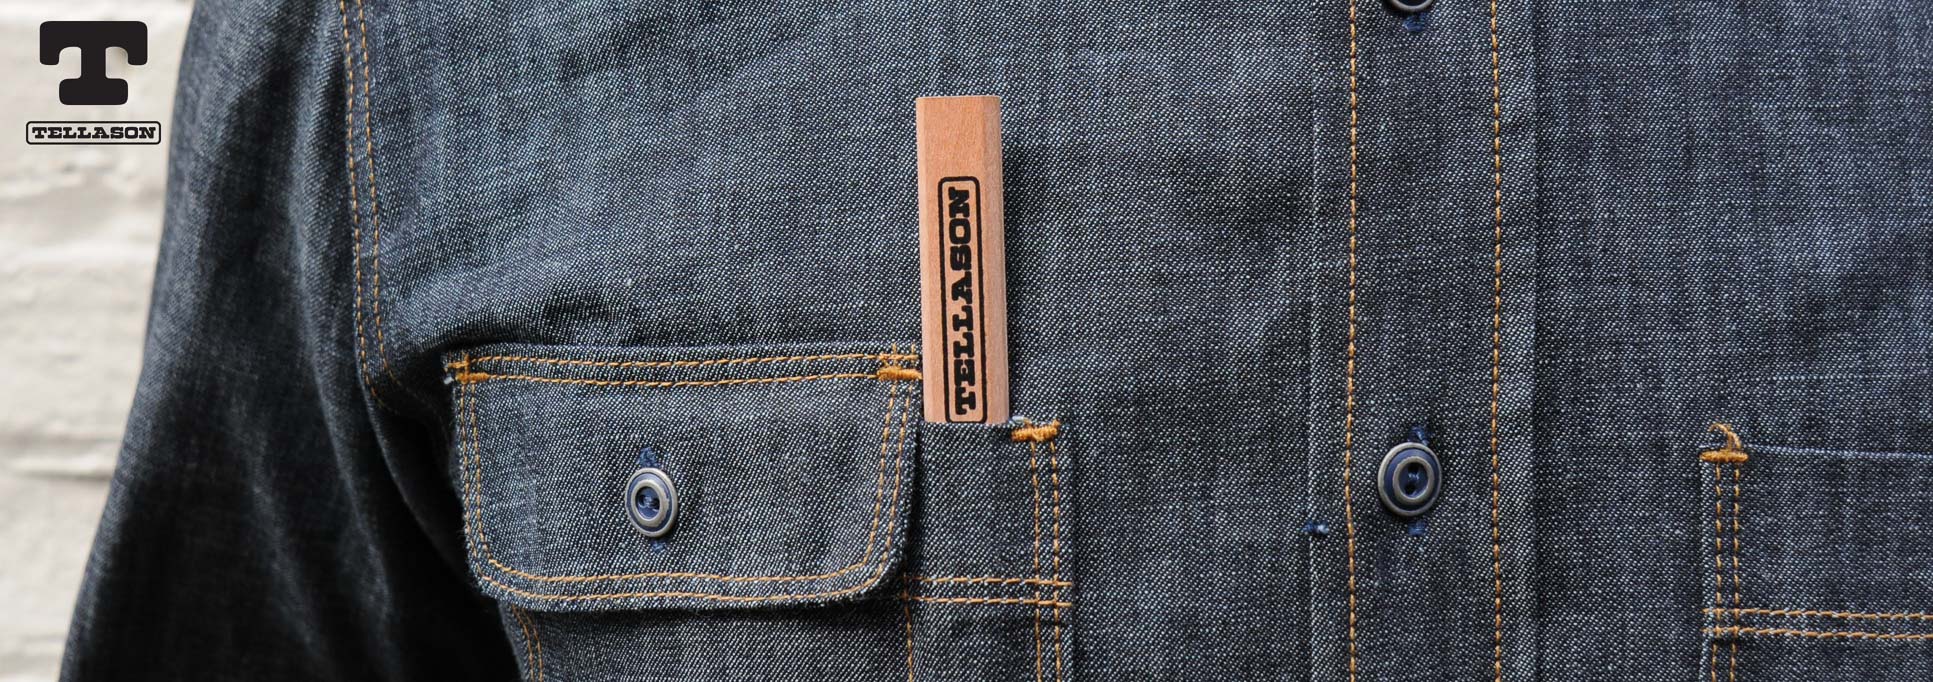 Buying Well-Made Menswear and Denim Encyclopedia